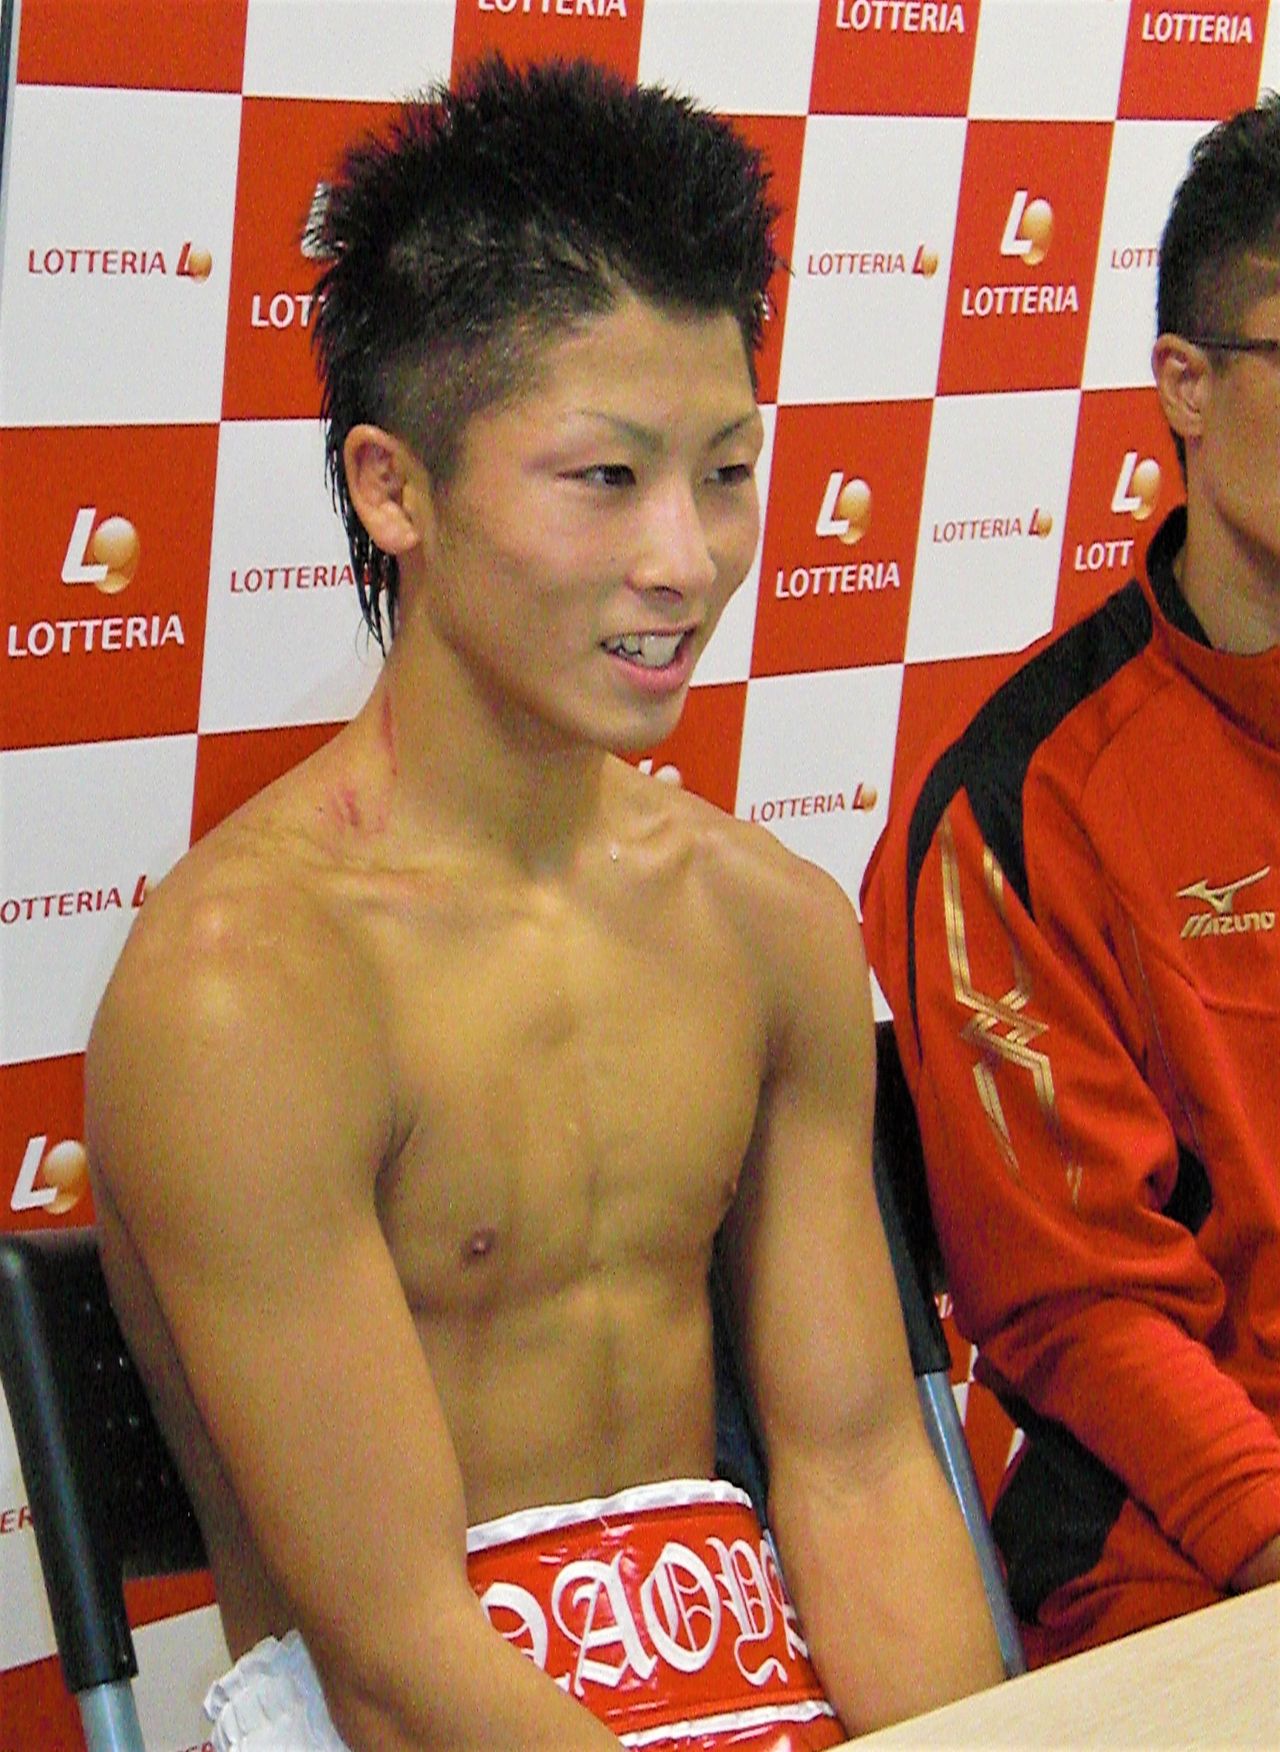 Inoue speaks to the press on October 2, 2012, after marking his professional debut at the age of 19 with a KO victory at Tokyo’s Kōrakuen Hall. (© Jiji)